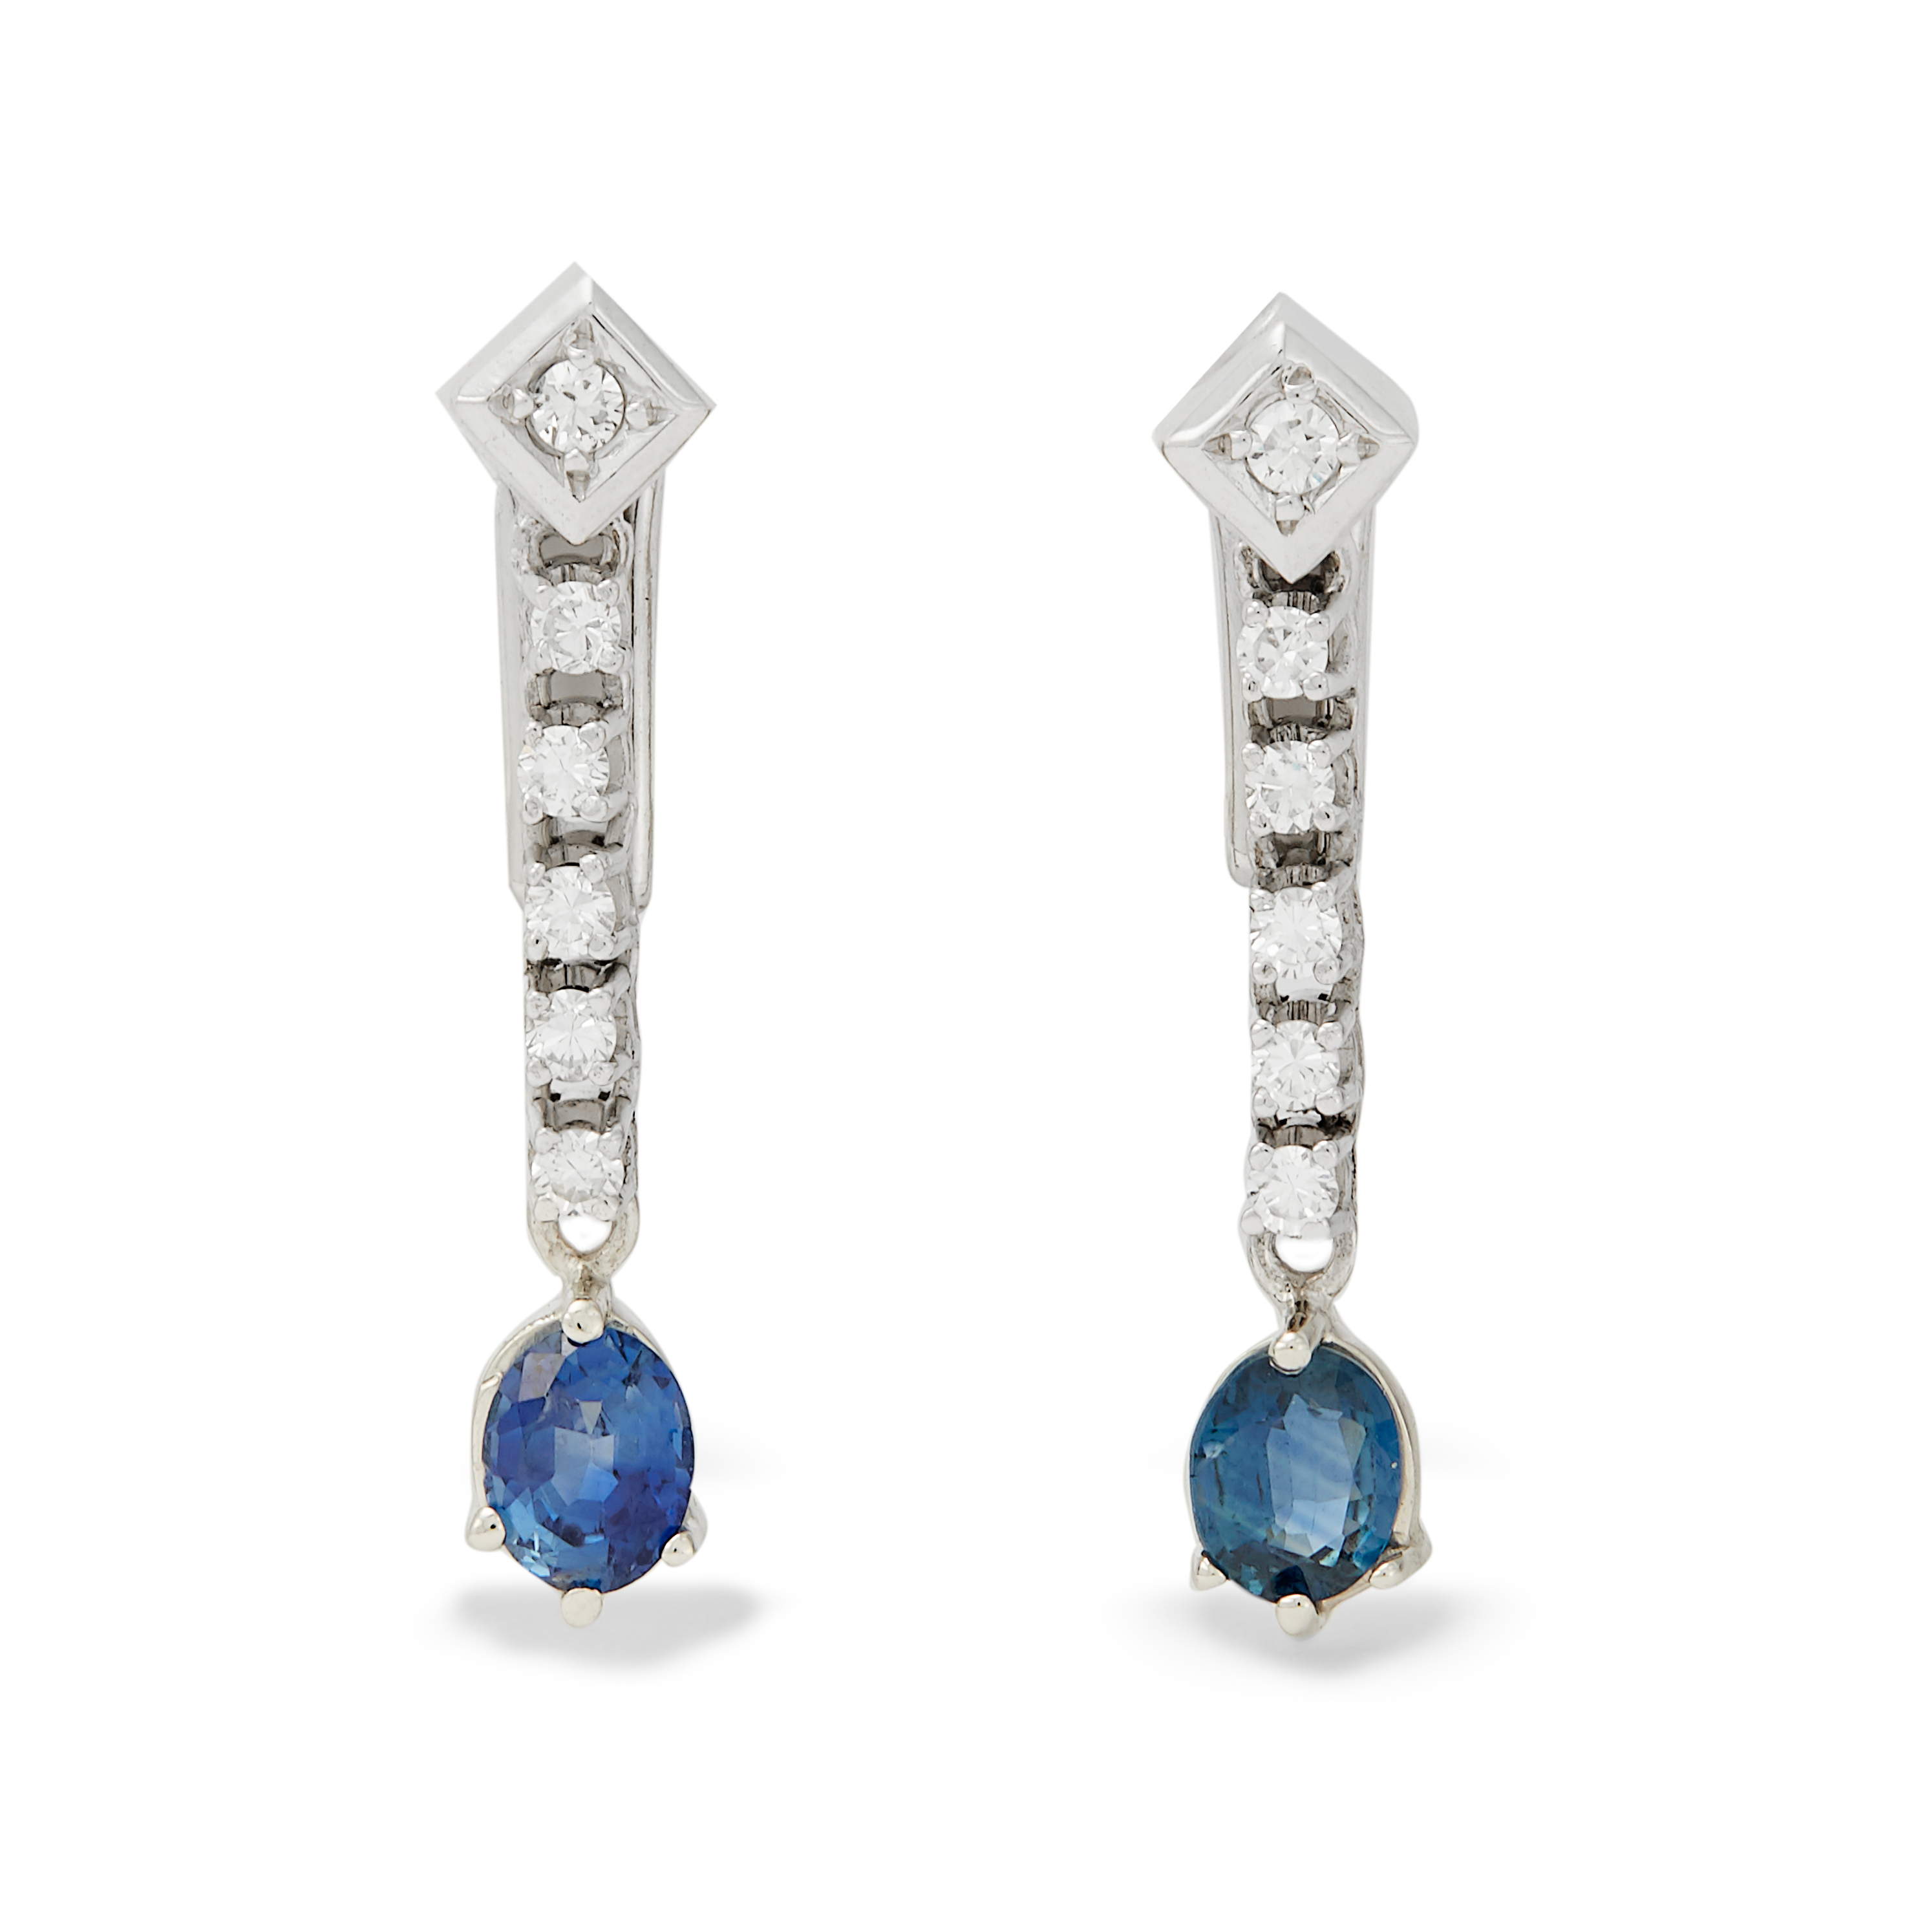 A pair of sapphire and diamond clip earrings.